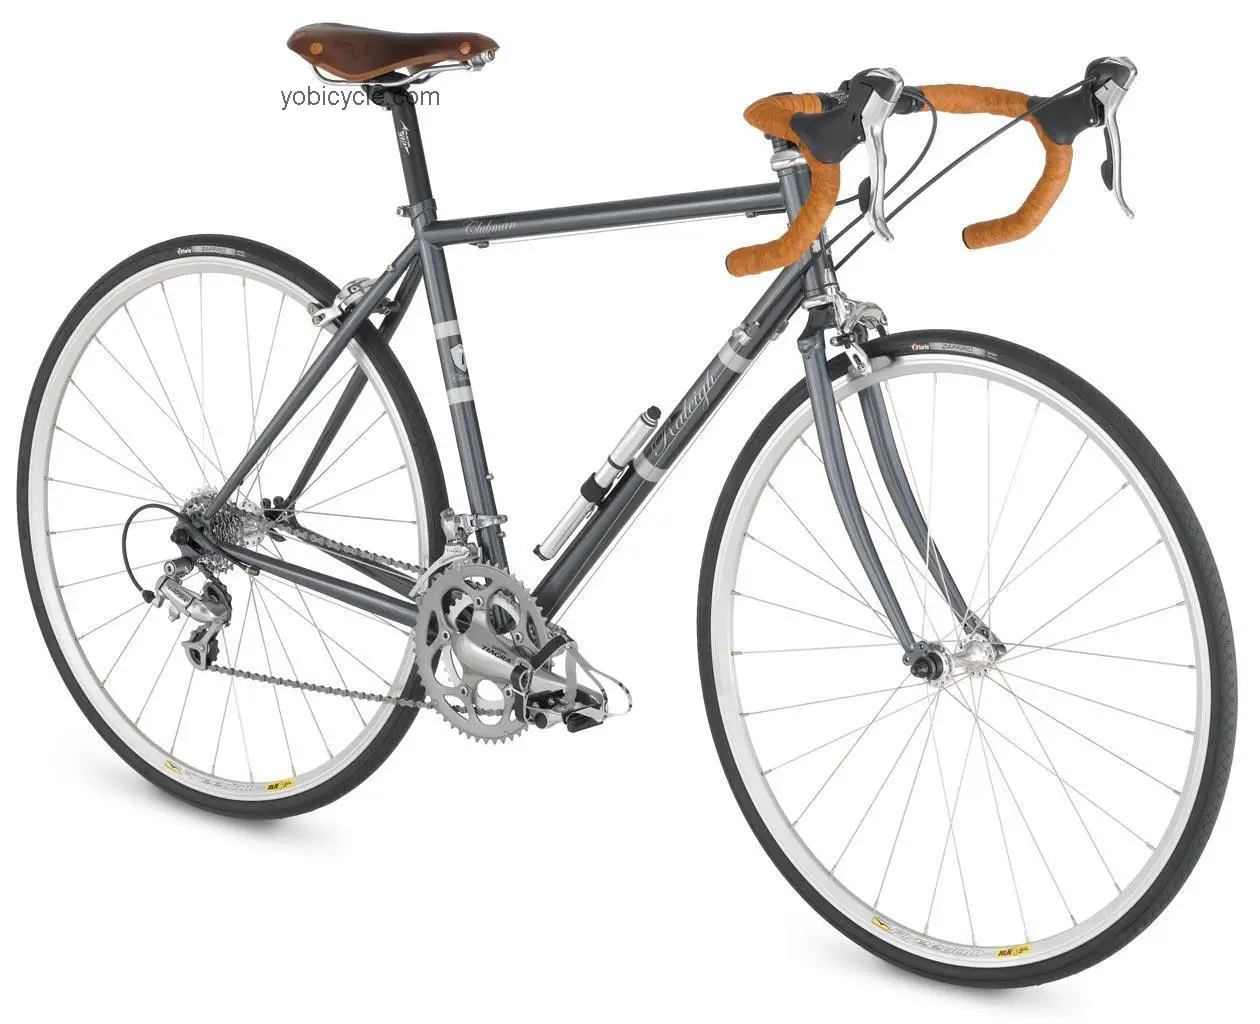 Raleigh Clubman 2009 comparison online with competitors